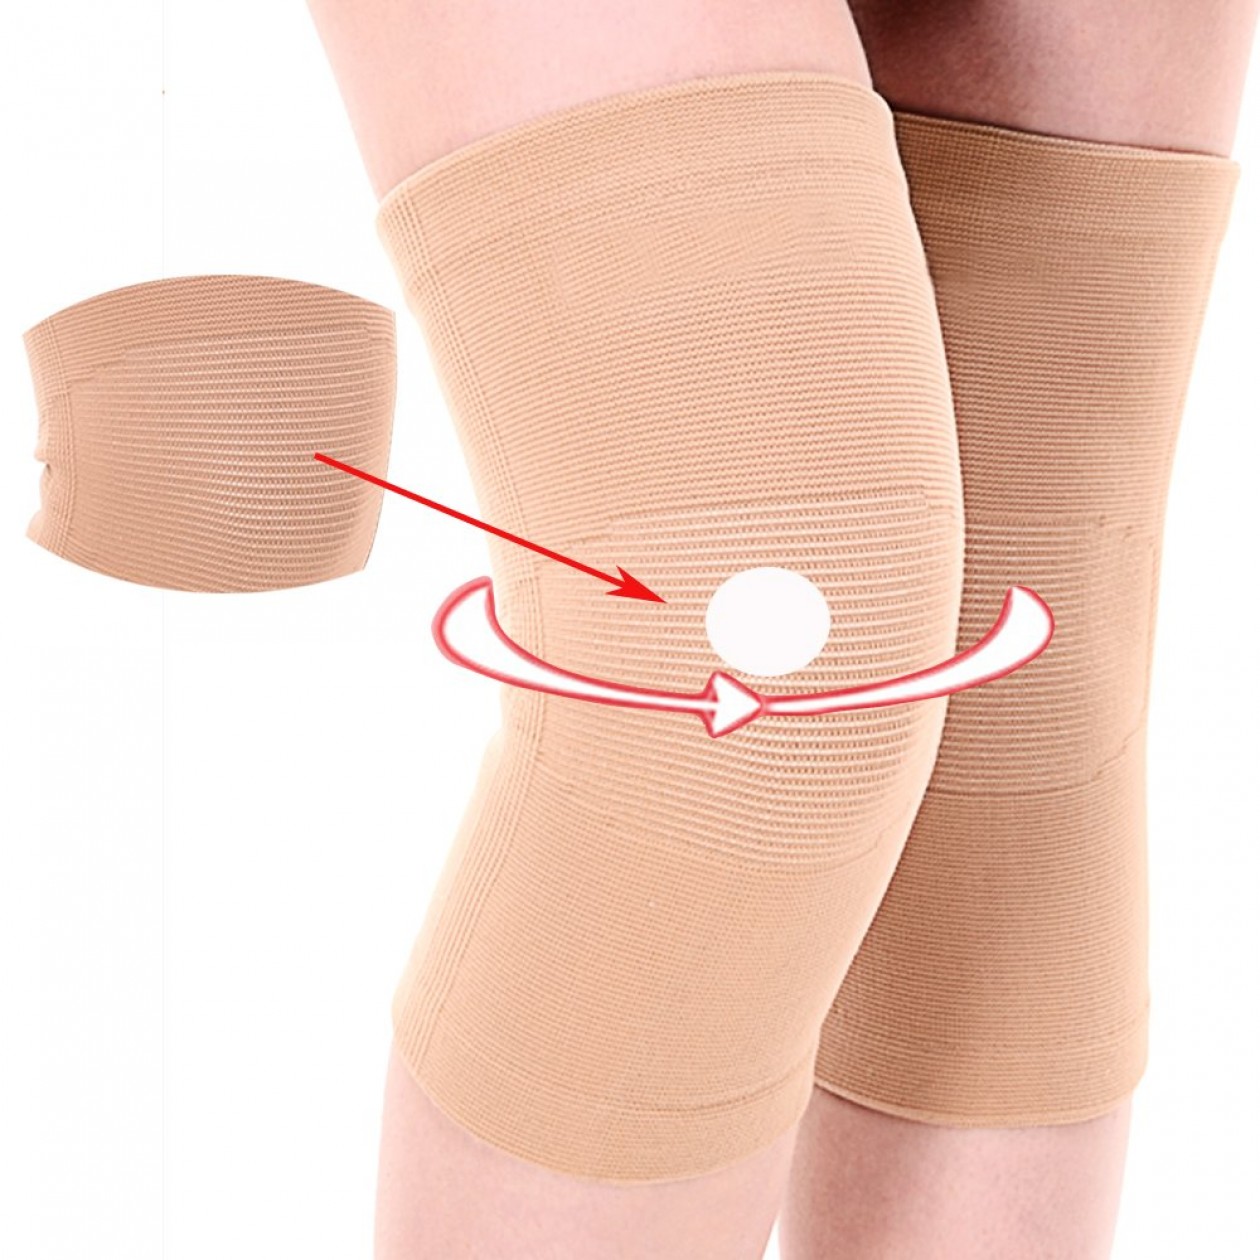 Elastic Knee Sleeve Support Small Size